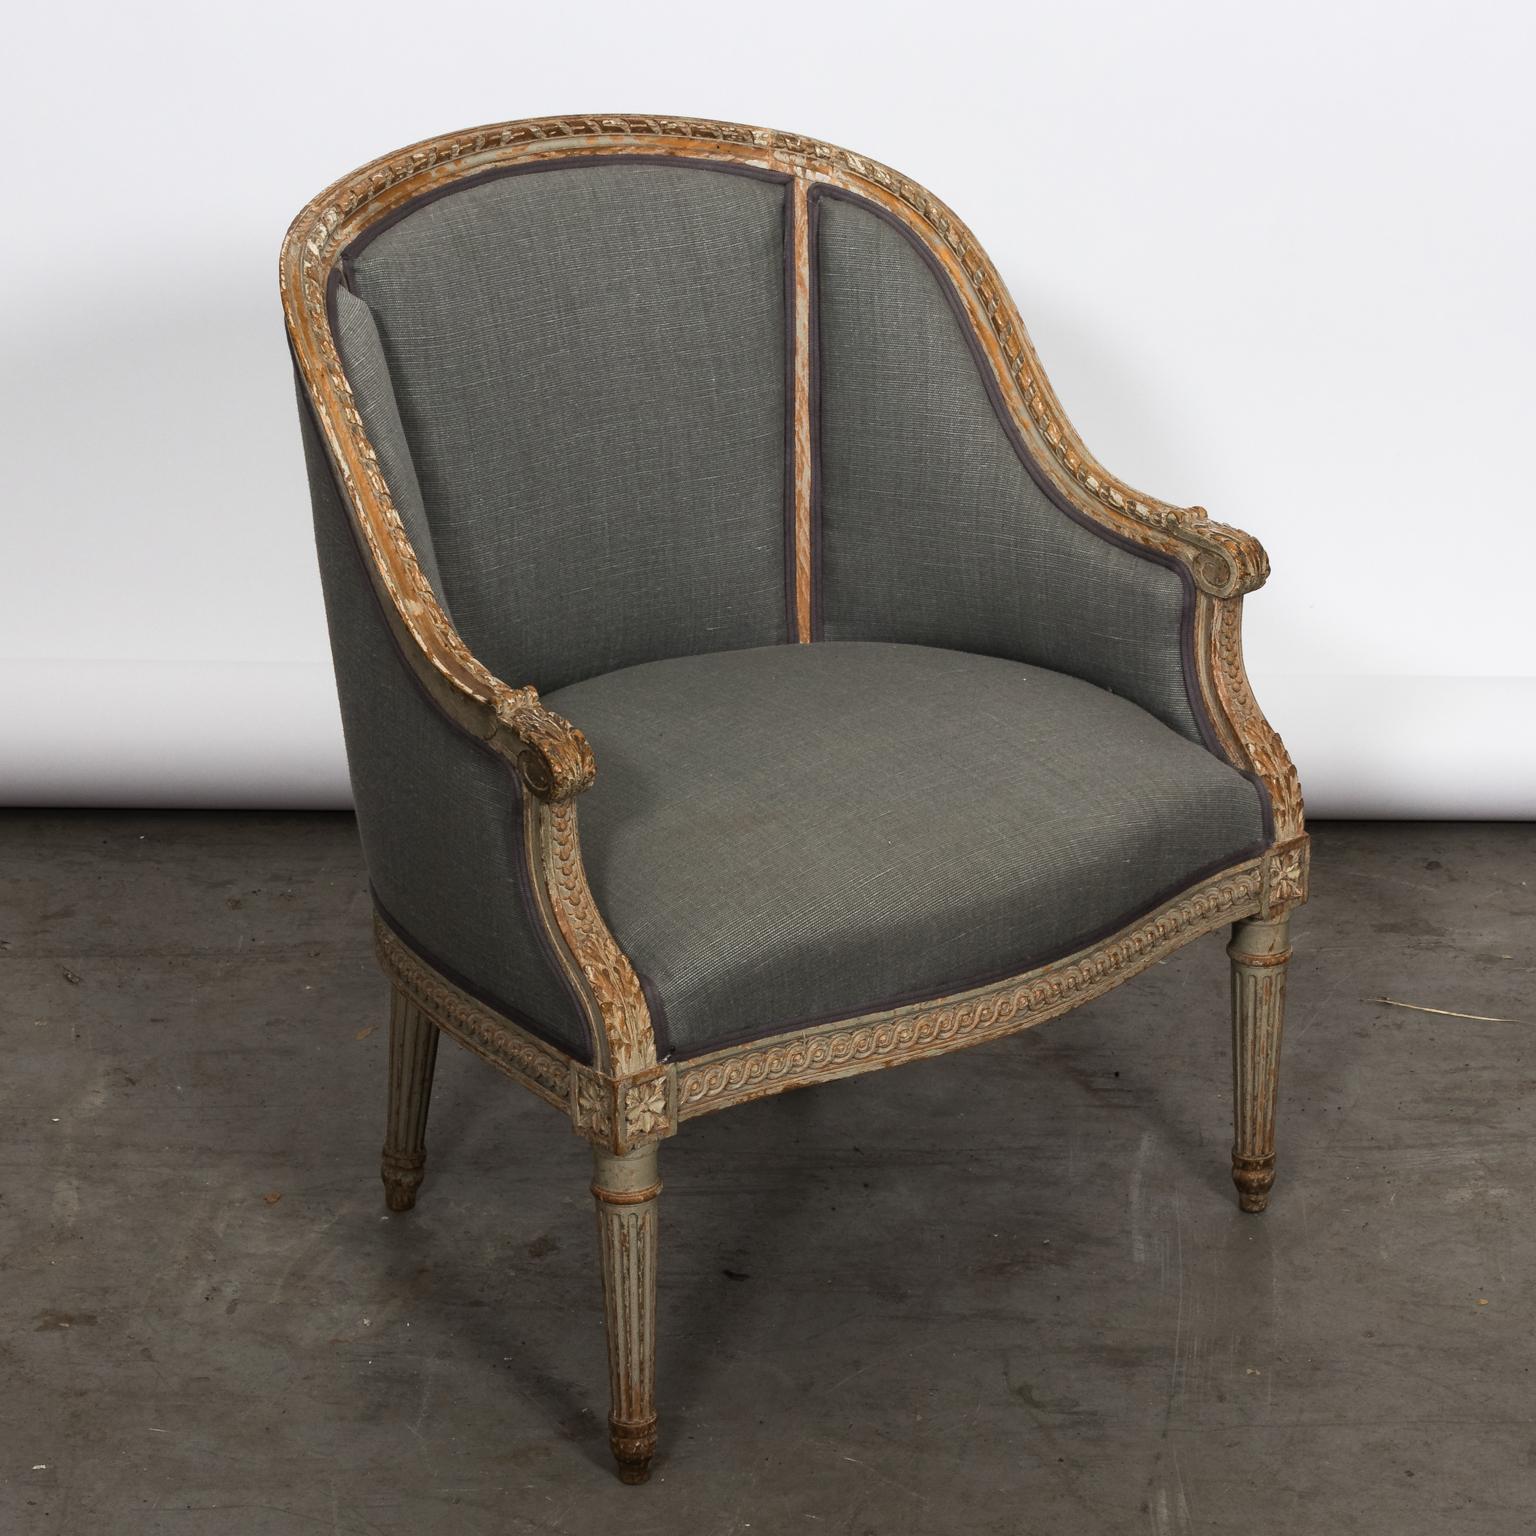 French Louis XVI style bergère style armchair with a curved back that features detailed carvings of rosettes, guilloche trim on the seat rail, and round fluted legs, circa early 20th century. Newly upholstered.